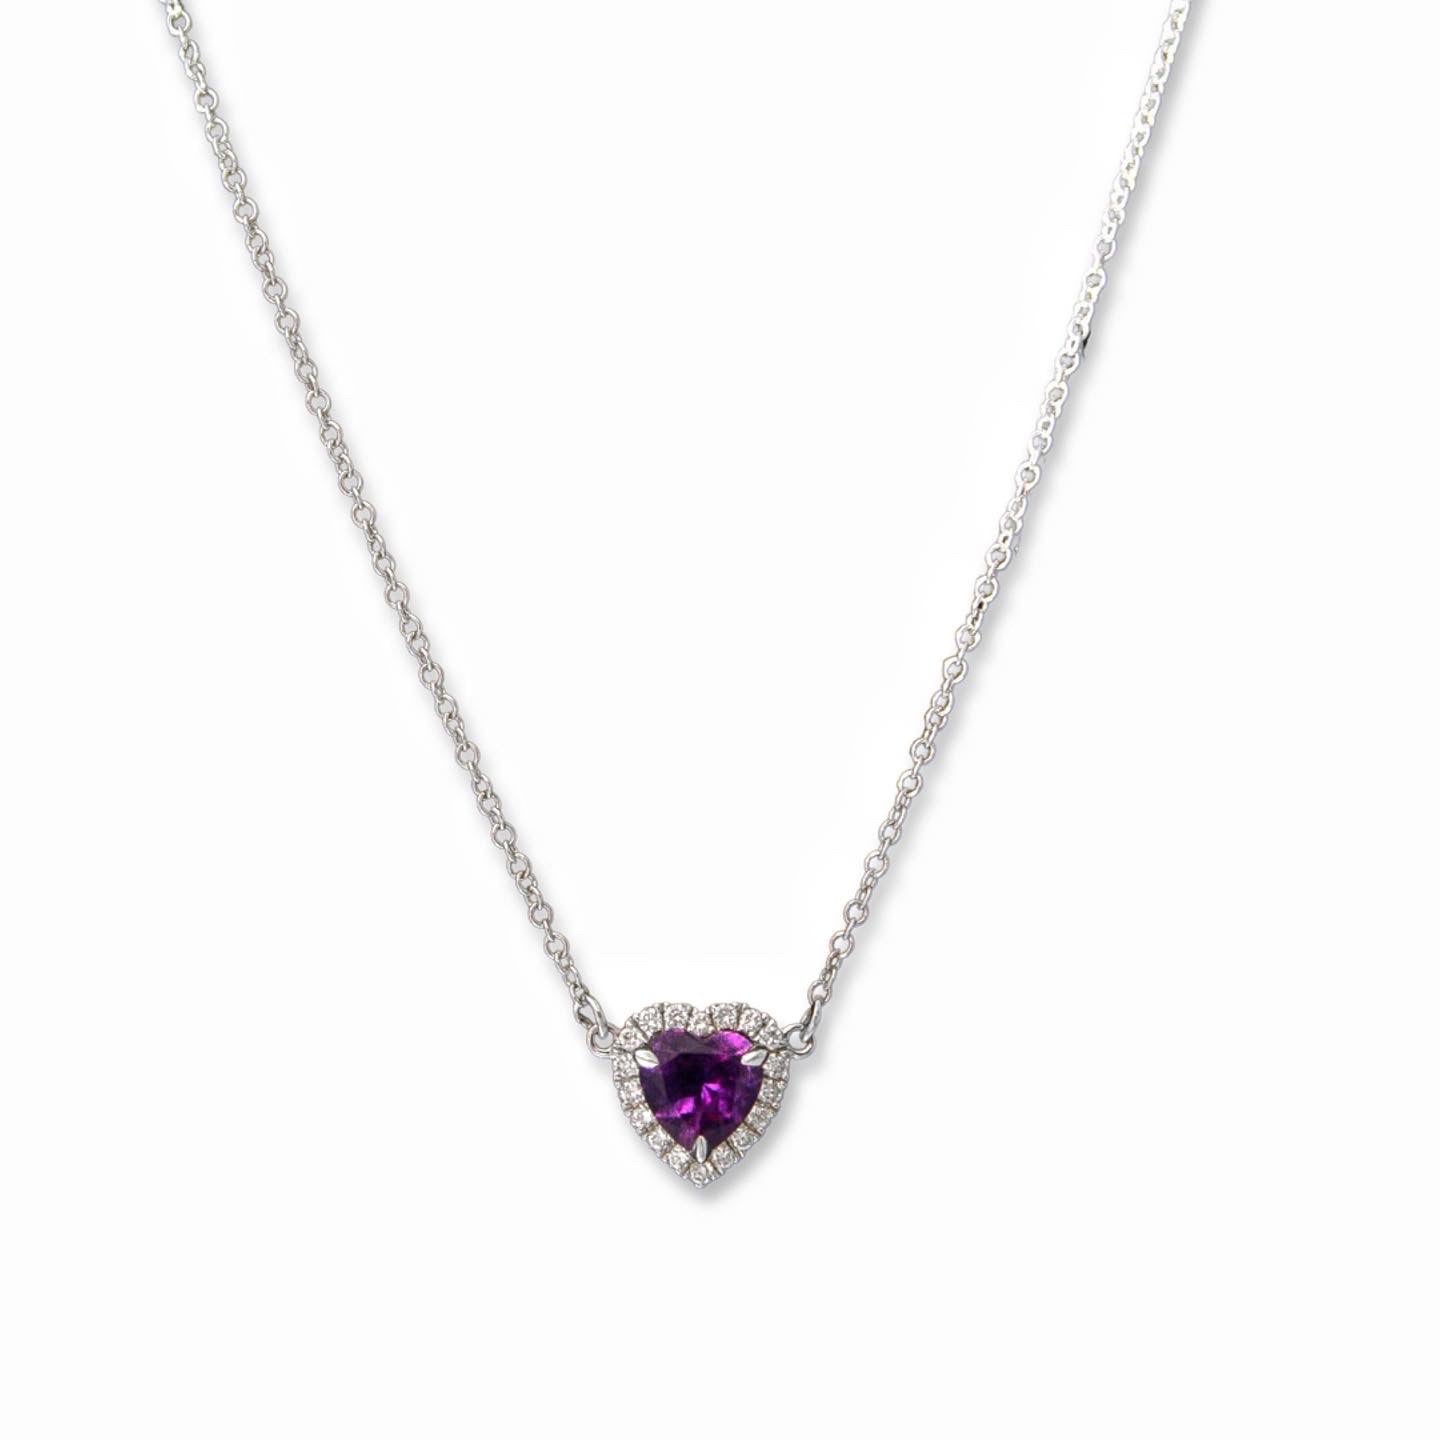 Amethyst Heart - 18K White Gold Necklace with Amethyst and Diamond Halo